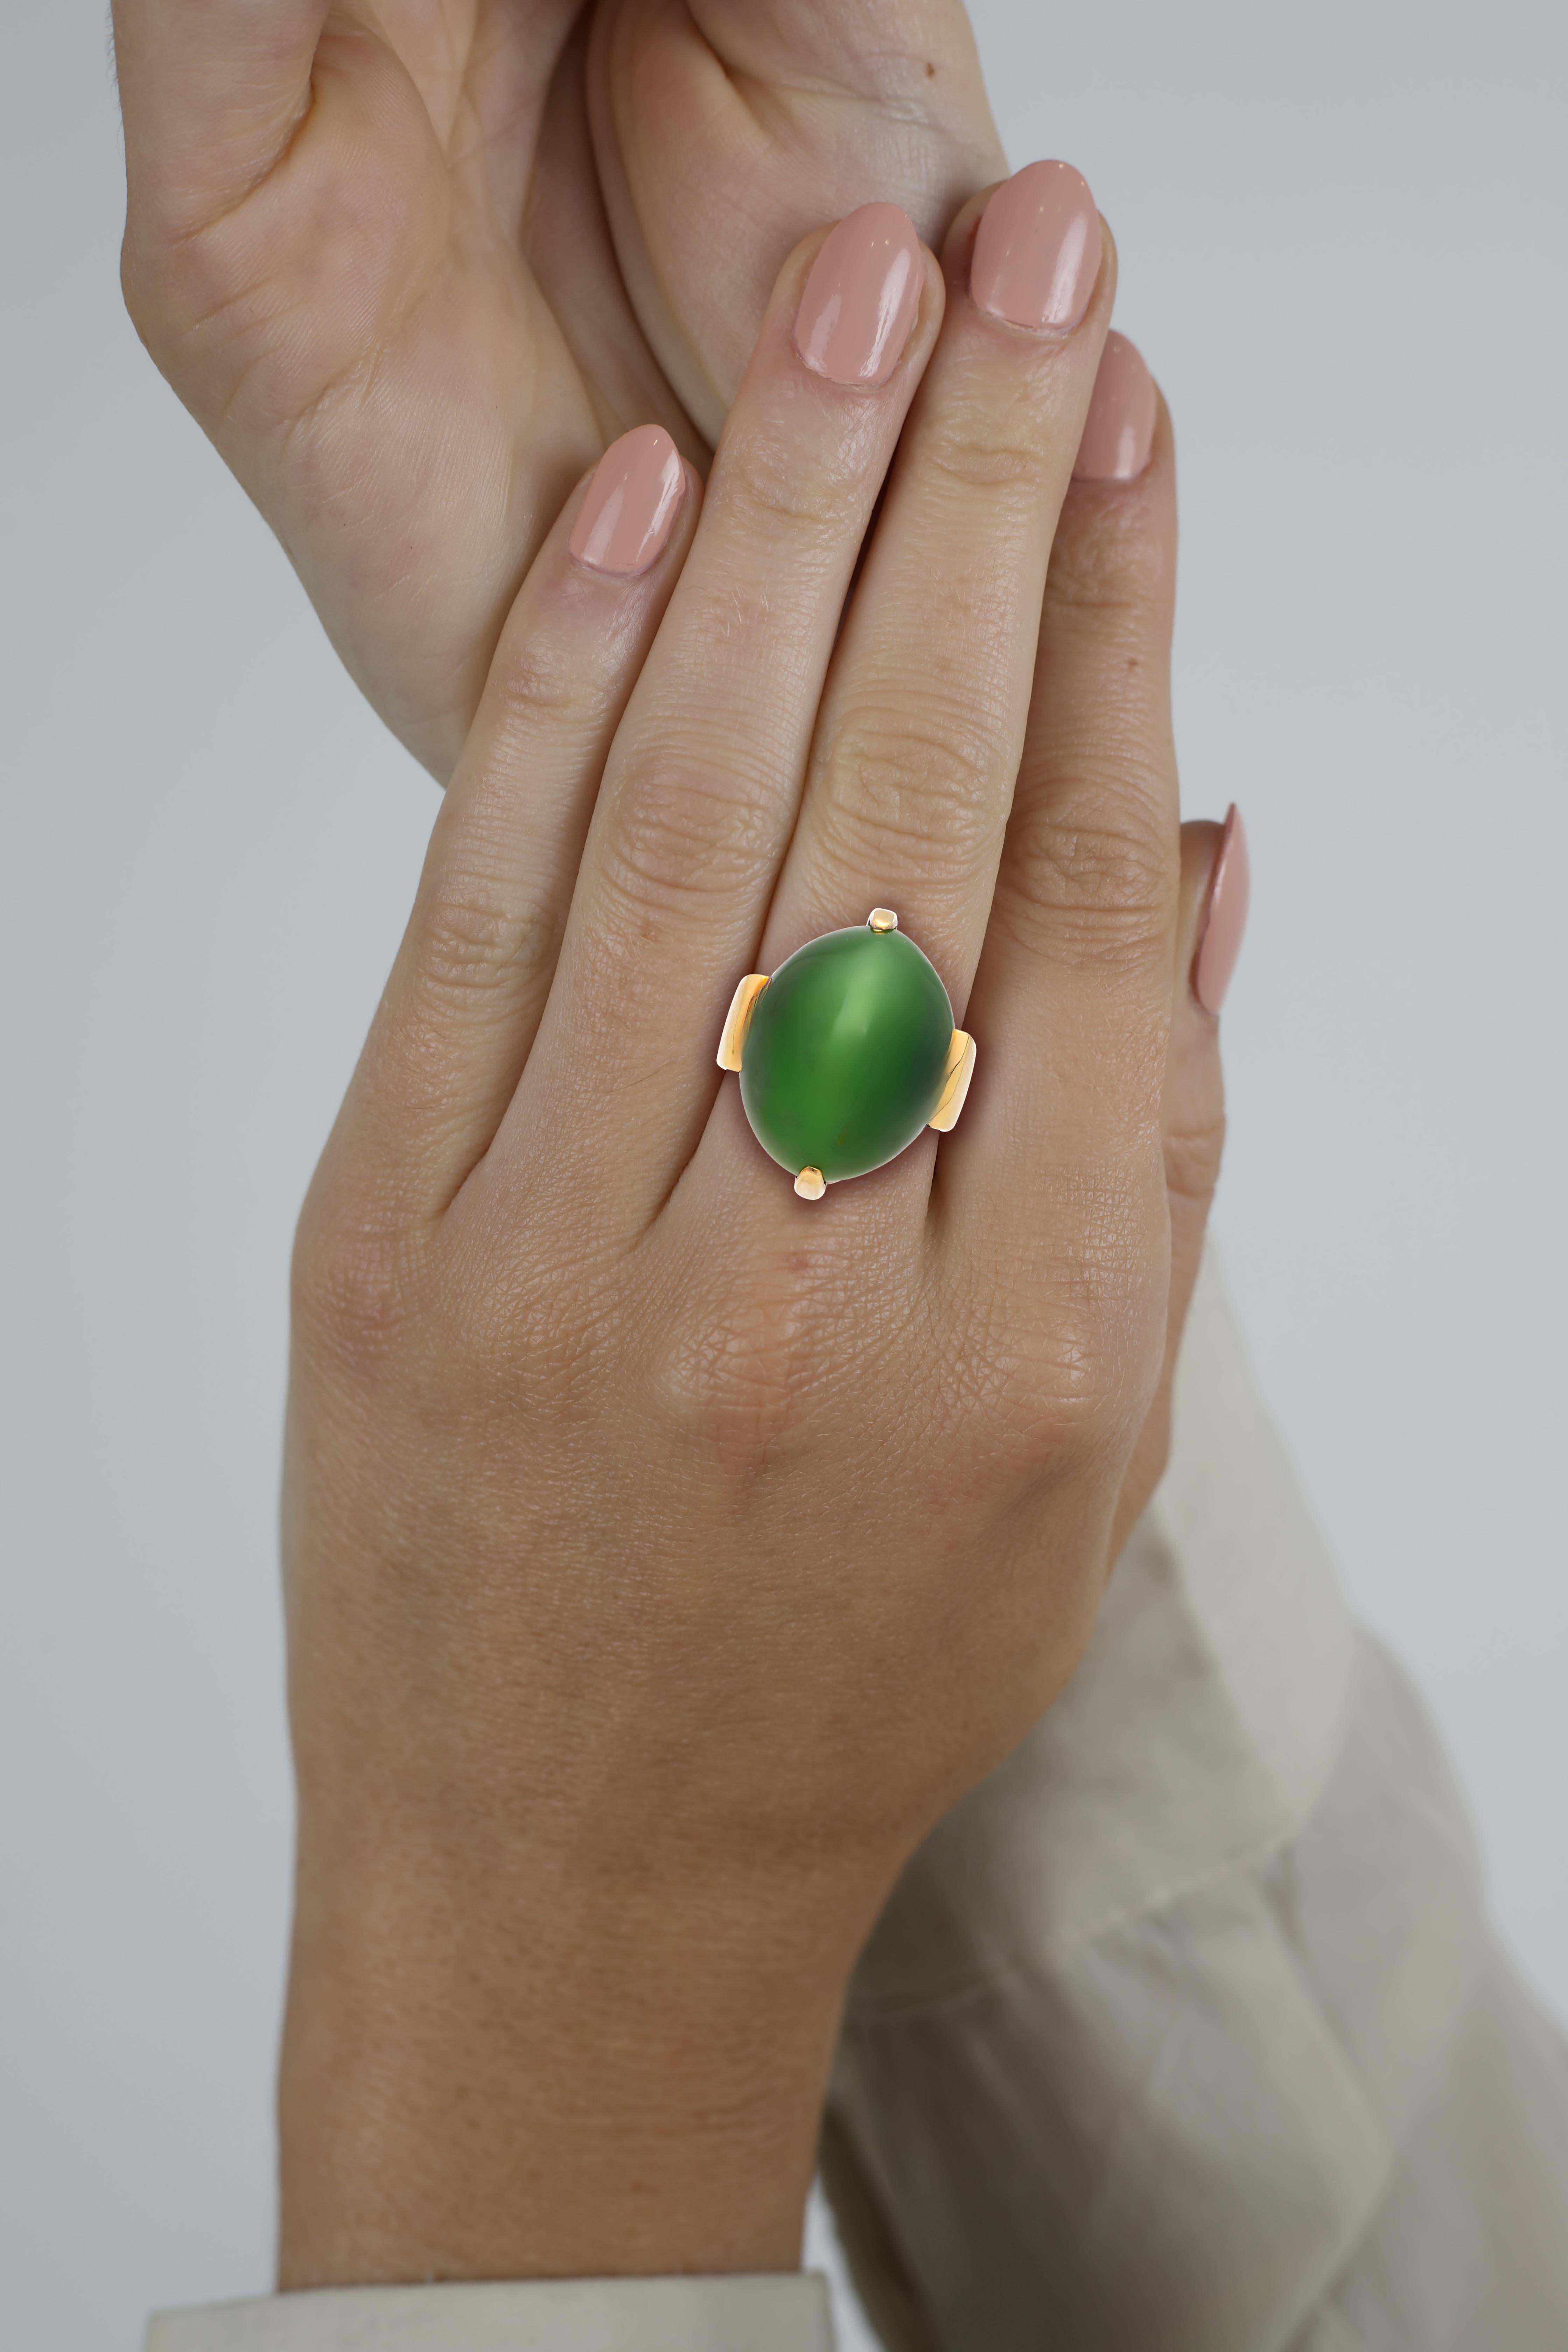 Cats Eye Gump Signed Ring in 14K Yellow Gold .

Invest in luxury with this vintage Gump signed dome solitaire ring, featuring a vivid green Cats Eye , shaped into an oval cabochon, and secured with a 4-prong setting. Crafted from 14K yellow gold,